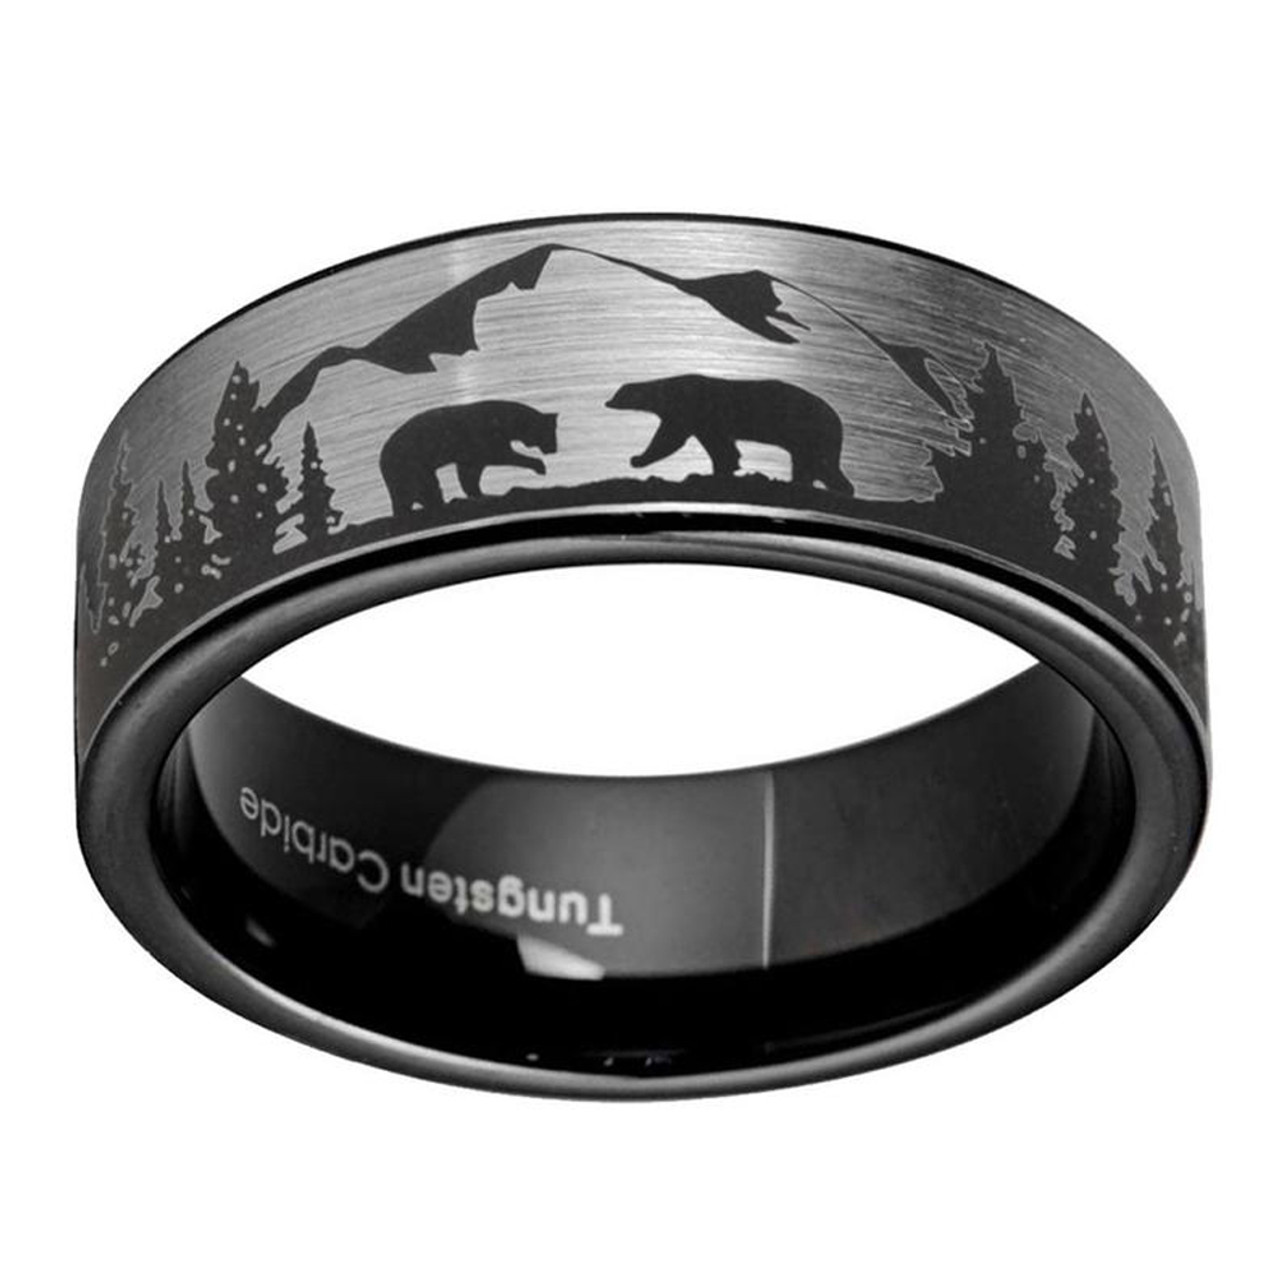 (8mm) Unisex or Men's Hunting Ring / Bear Mountains Wedding ring band. Brushed Silver Tungsten Carbide Band with Bears, Forest Trees and Mountain Scape Laser Etched Design. Pipe Cut Hunter's Wedding ring band Comfort Fit Ring